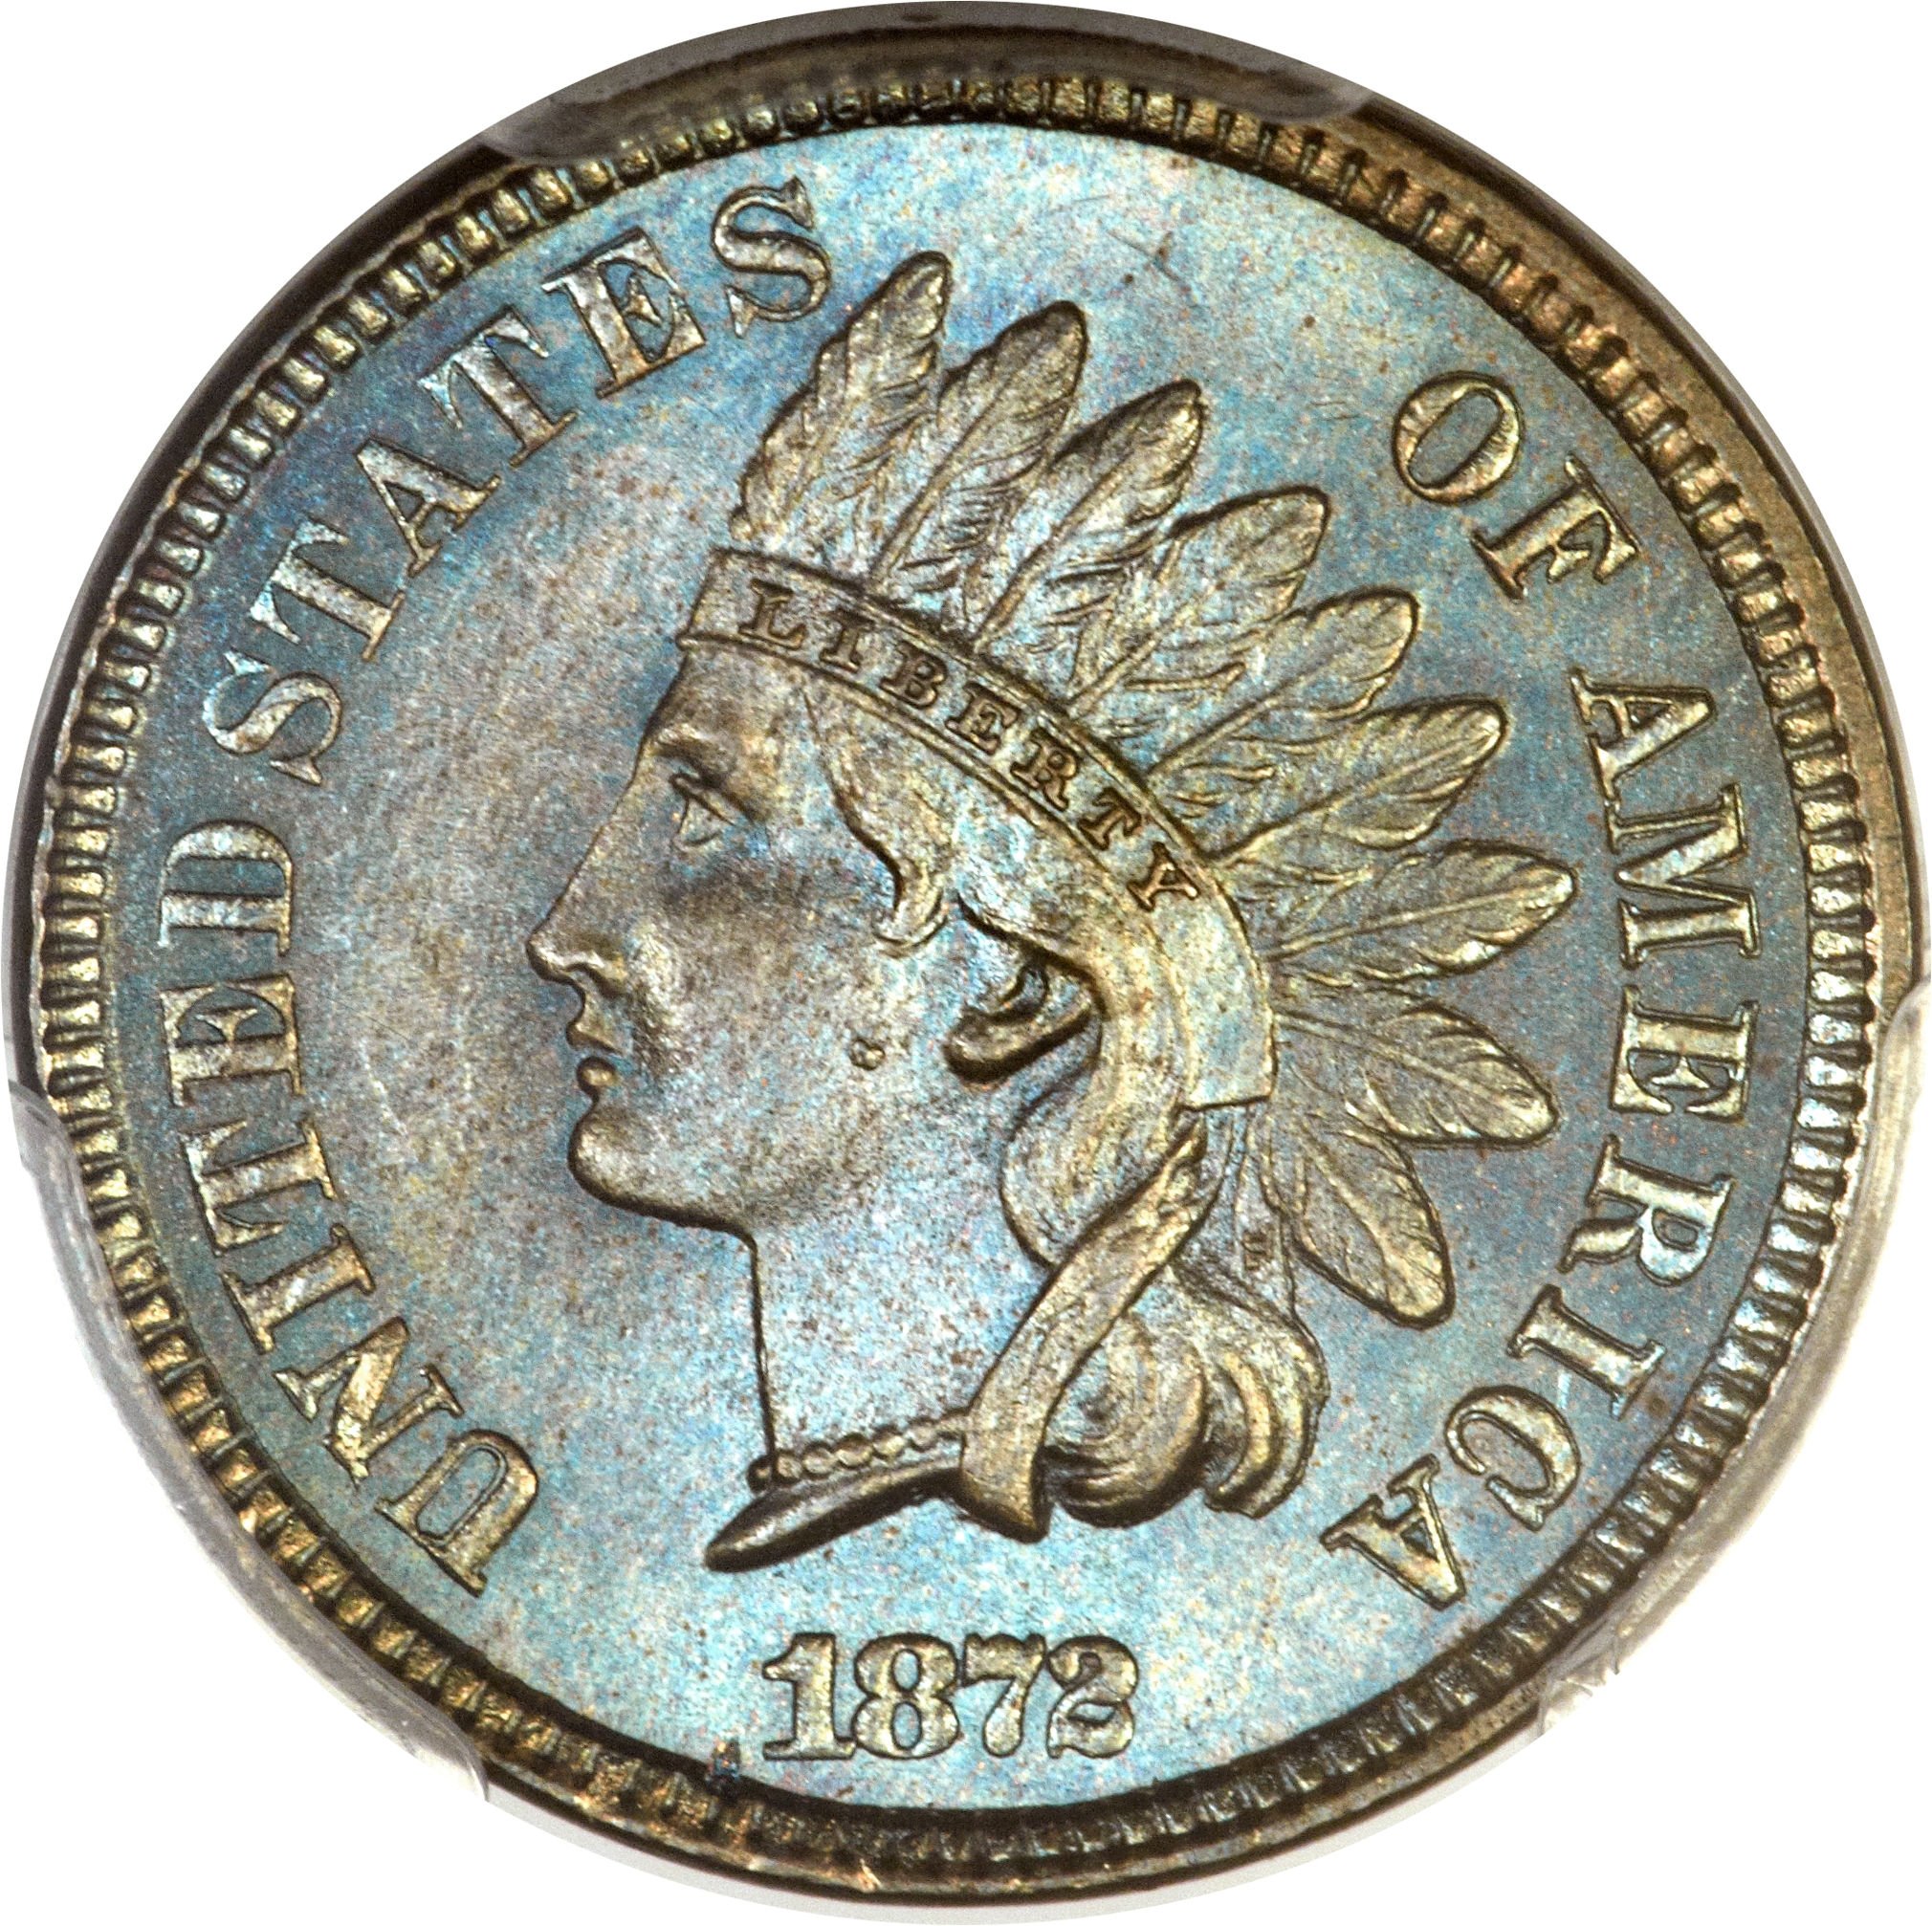 1872 Obverse of DIE-002 Shallow N Indian Head Penny - Photos courtesy of Heritage Auctions